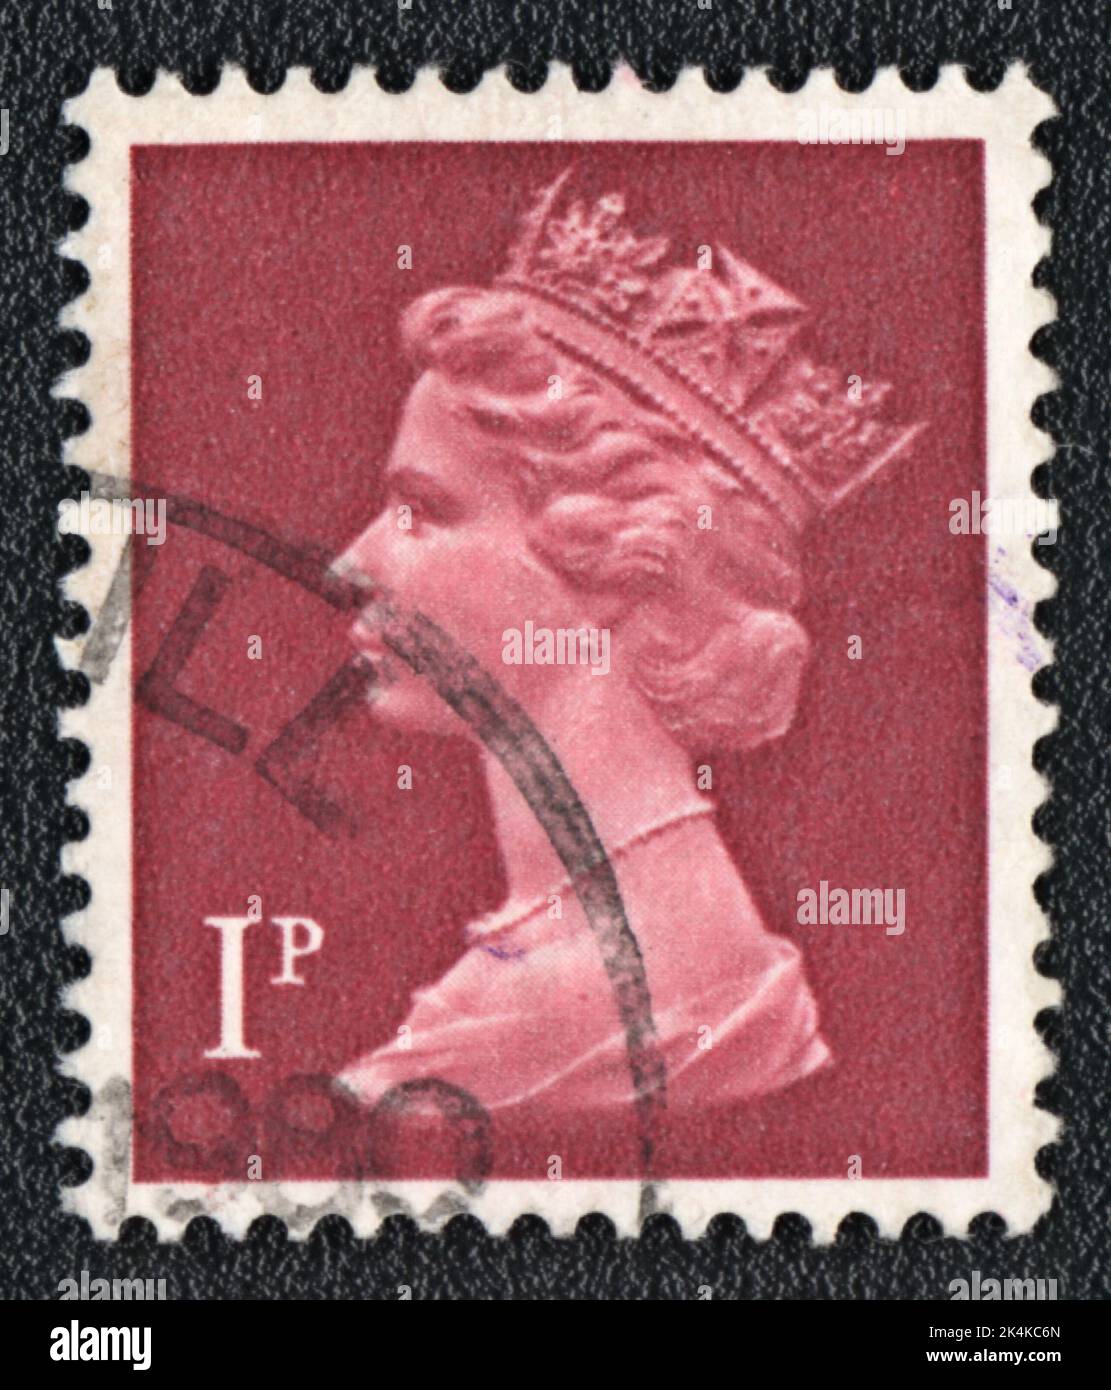 GREAT BRITAIN - CIRCA 1980: stamp printed by Great Britain, shows Portrait of Queen Elizabeth 2nd on red, circa 1980 Stock Photo